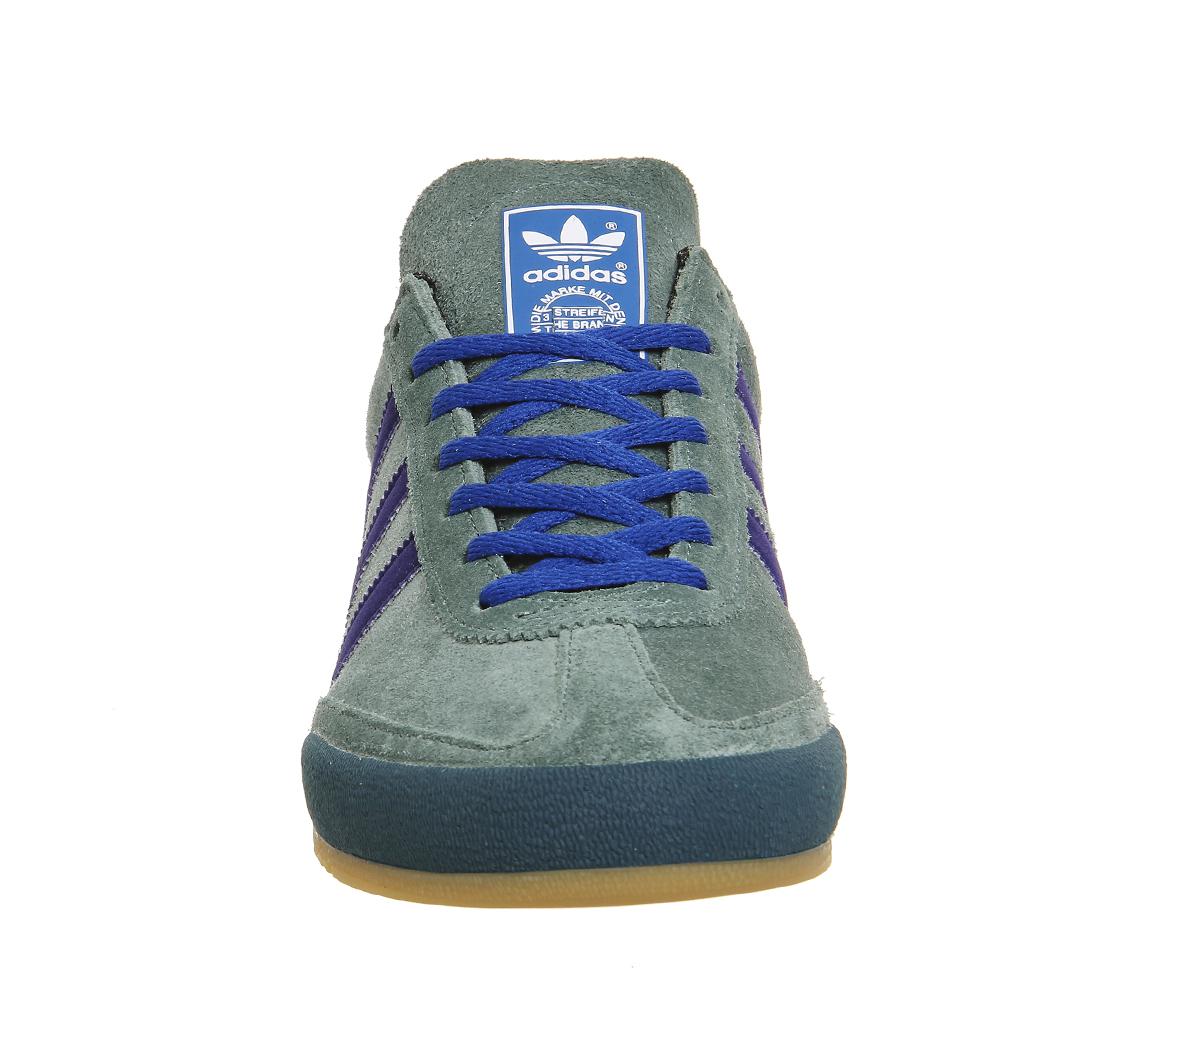 adidas jeans 2 green blue